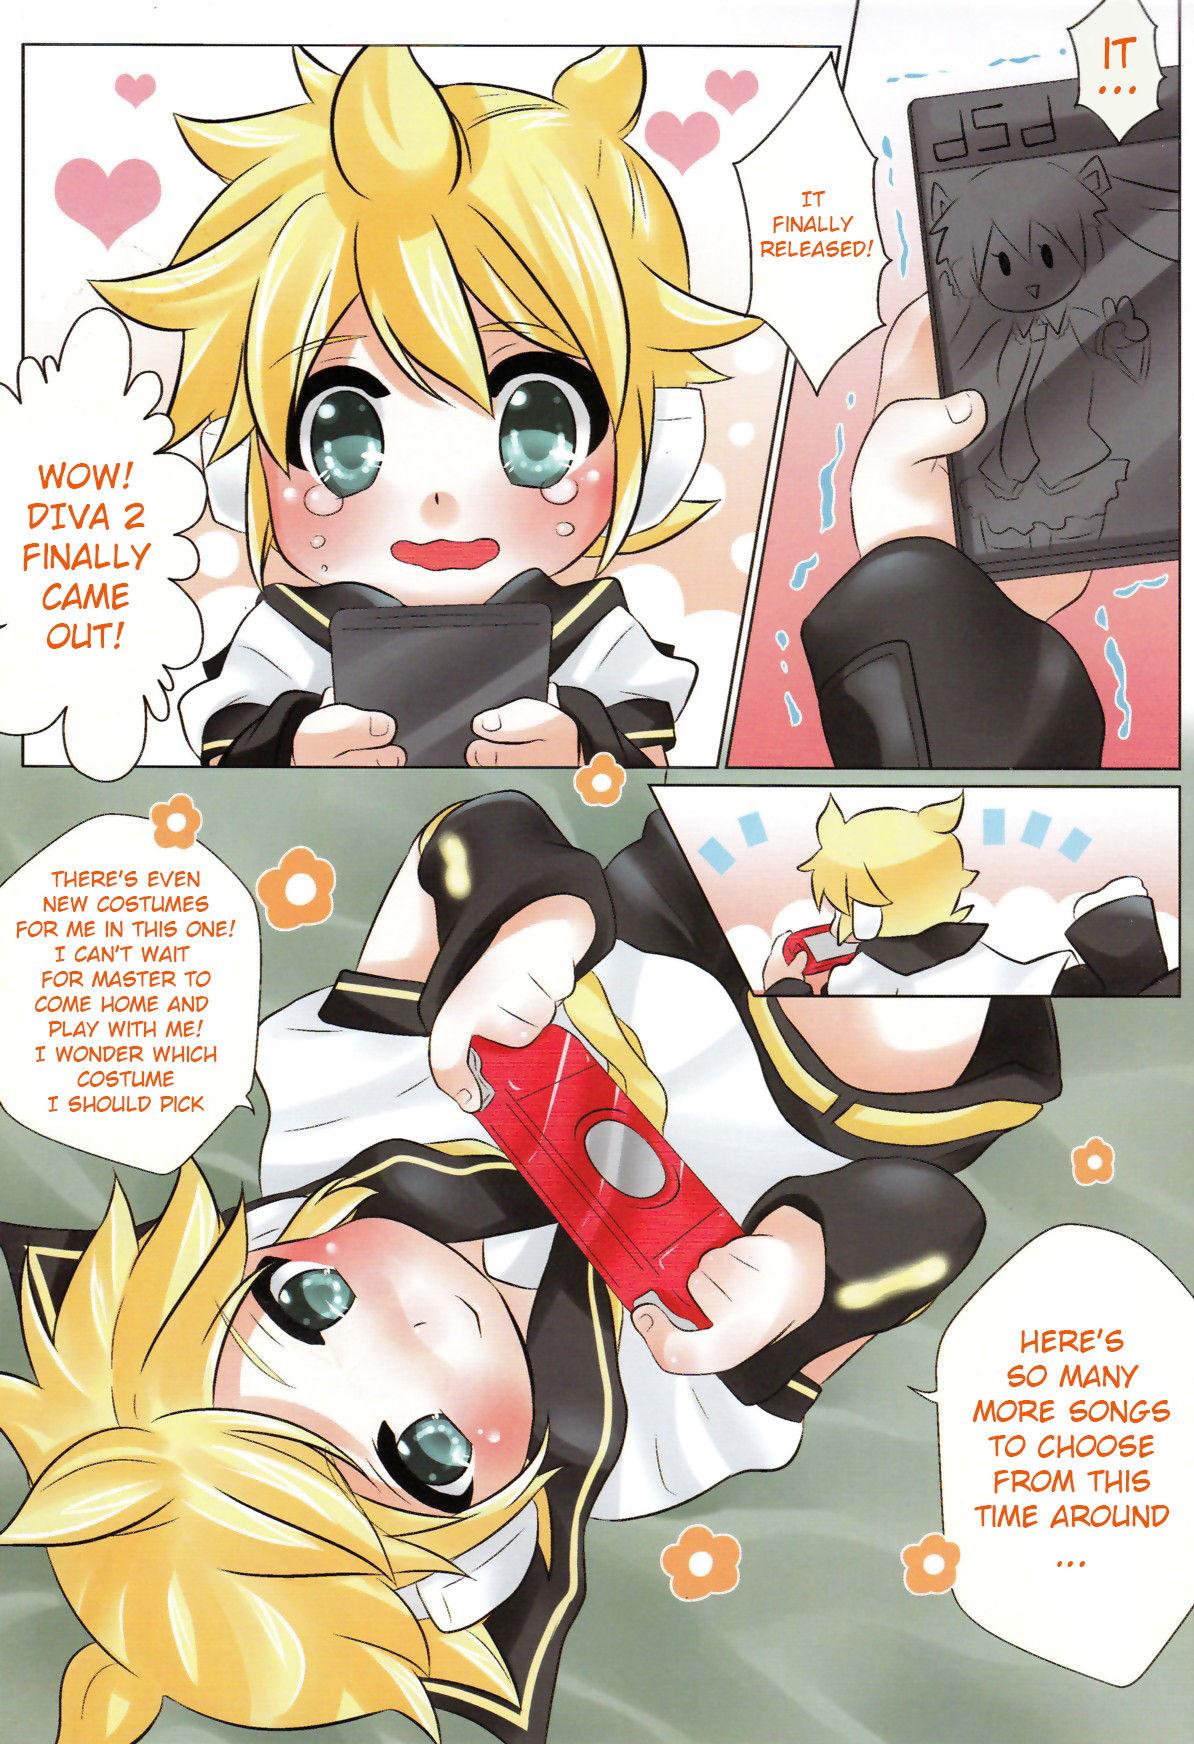 Girls Getting Fucked Project Len-kyun 2 - Vocaloid Putinha - Page 3